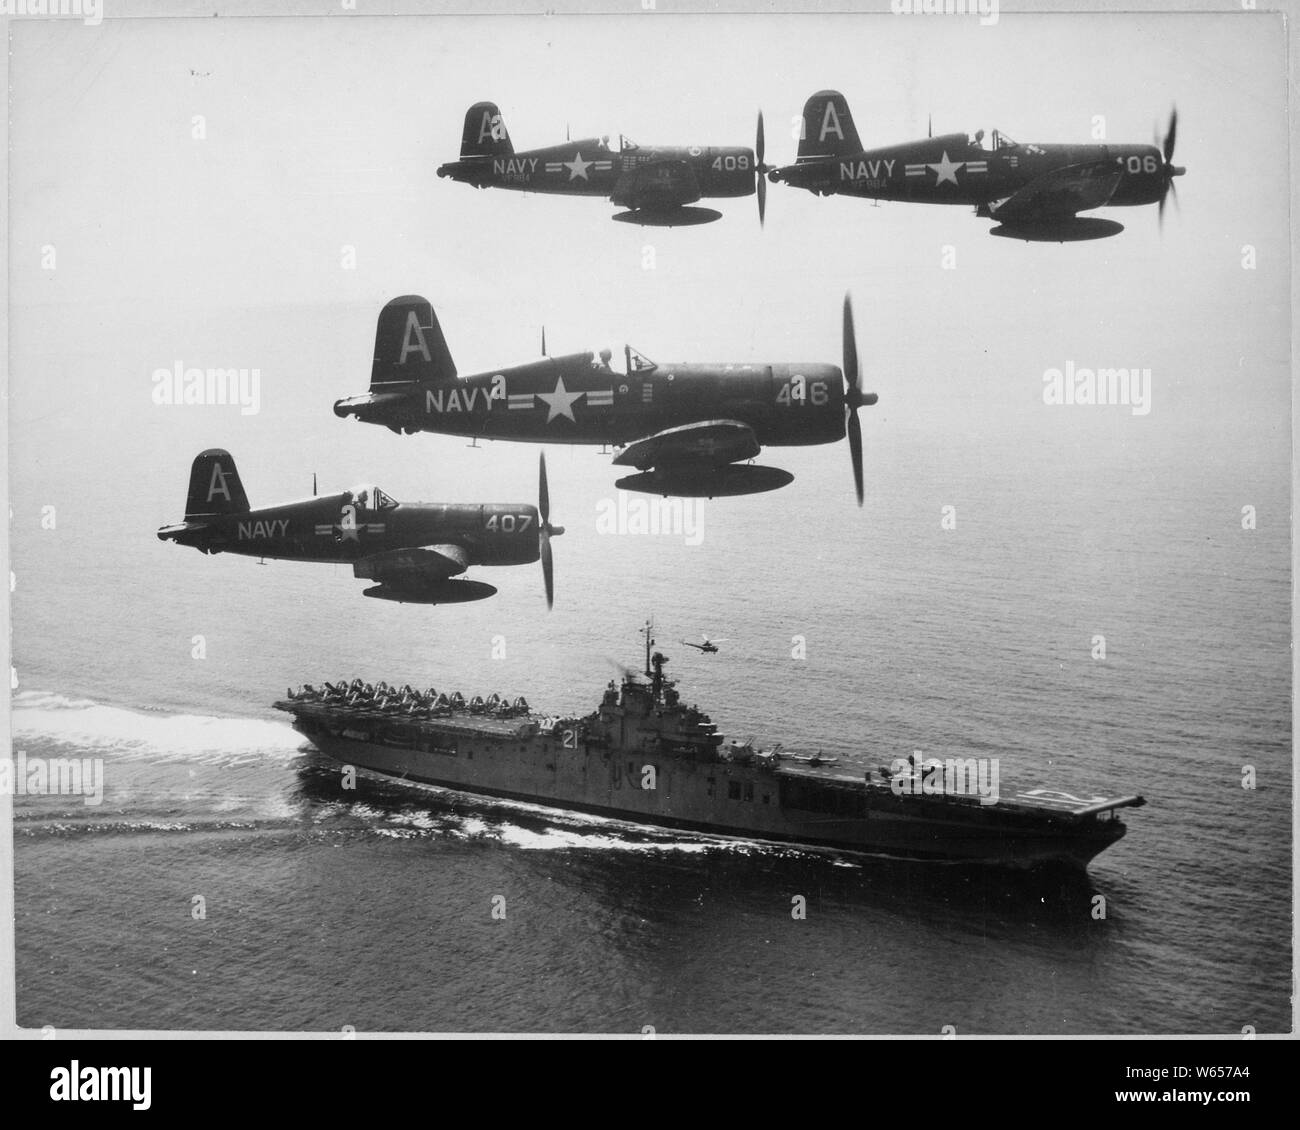 F4U's (Corsairs) returning from a combat mission over North Korea circle the USS Boxer as they wait for planes in the next strike to be launched from her flight deck-a helicopter hovers above the ship.; General notes:  Four U.S. Navy Vought F4U-4 Corsiars from fighter squadron VF-884 Bitter Birds fly past their parent carrier USS Boxer (CV-21) on 4 September 1951. Boxer was deployed to Korea with Carrier Air Group 101 (CVG-101) from 2 March to 24 October 1951. Stock Photo